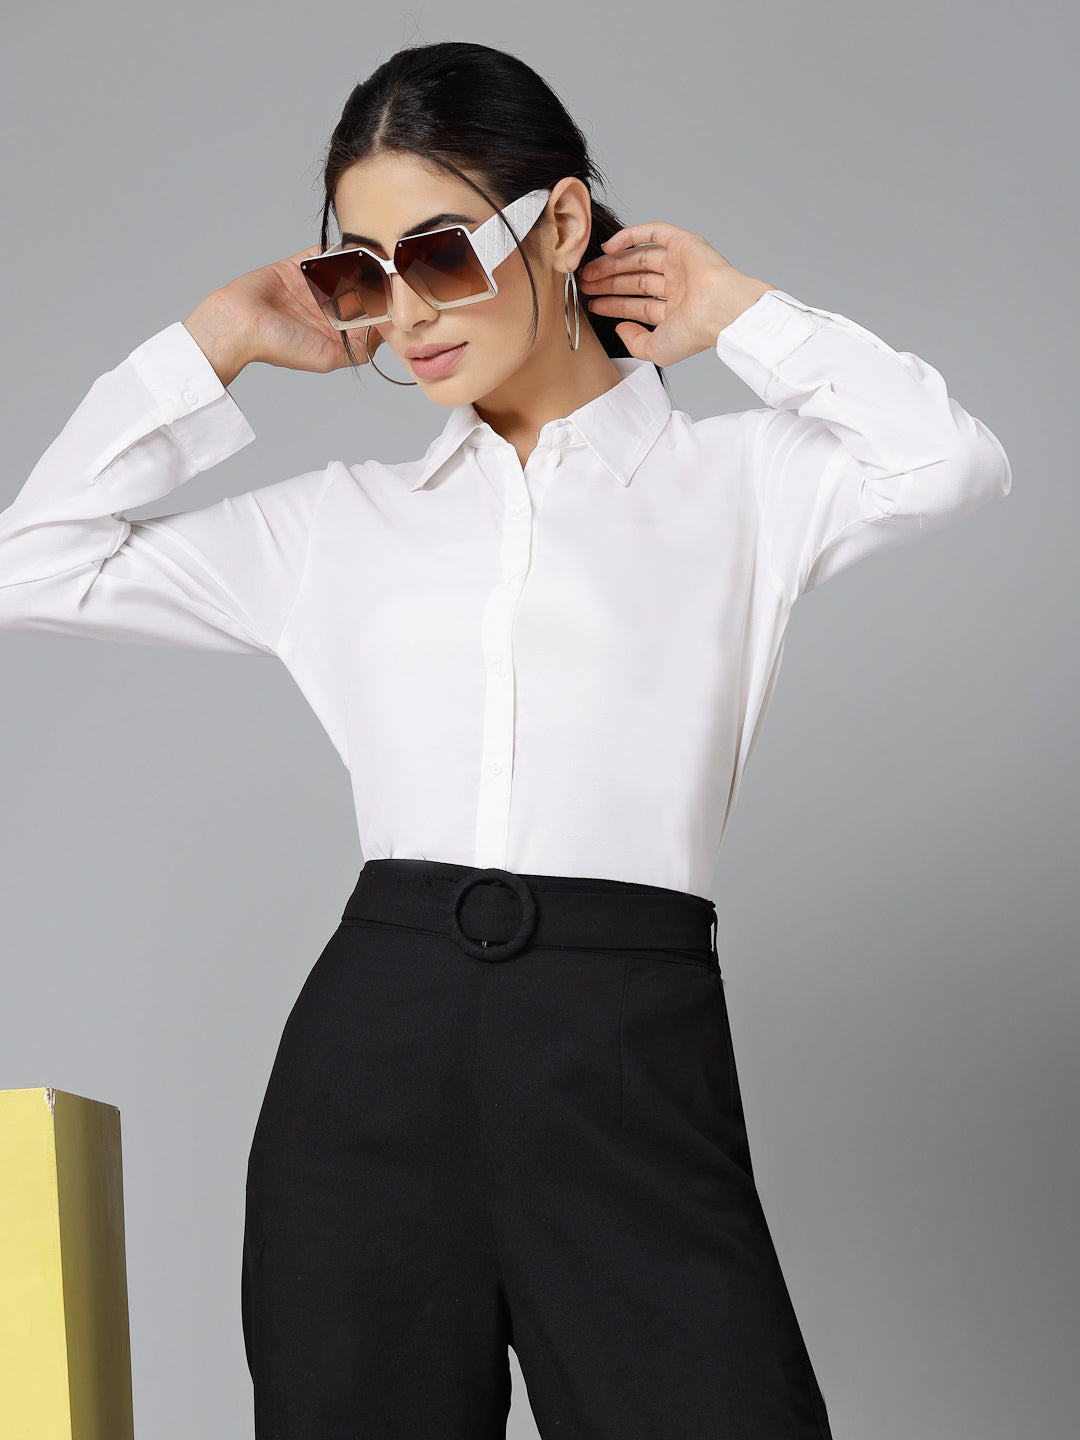 Attractive Woman Wear Business Look. Women Look and Sensual. Model Wear White  Shirt and Black Pants. Stock Photo - Image of beautiful, bright: 223181872